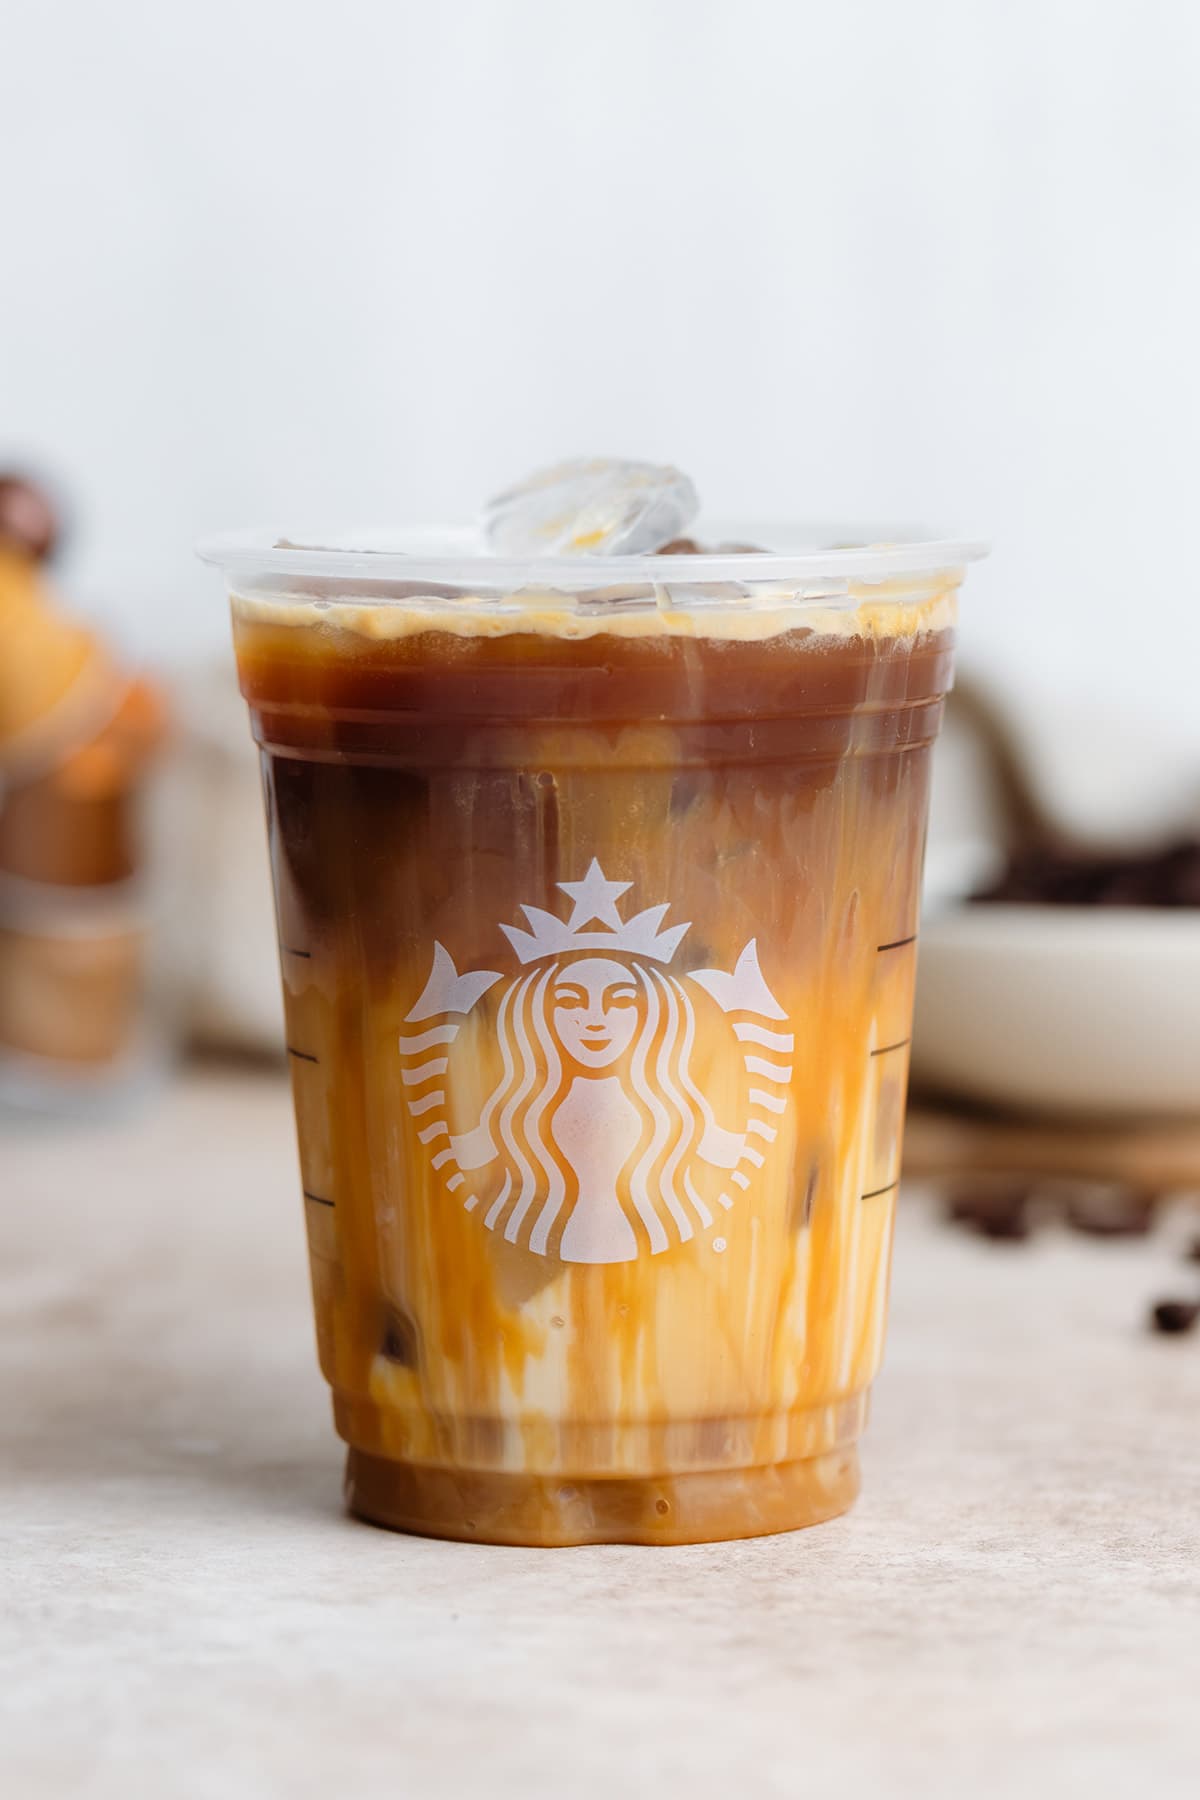 Iced caramel macchiato in a plastic Starbucks cup on a beige background.